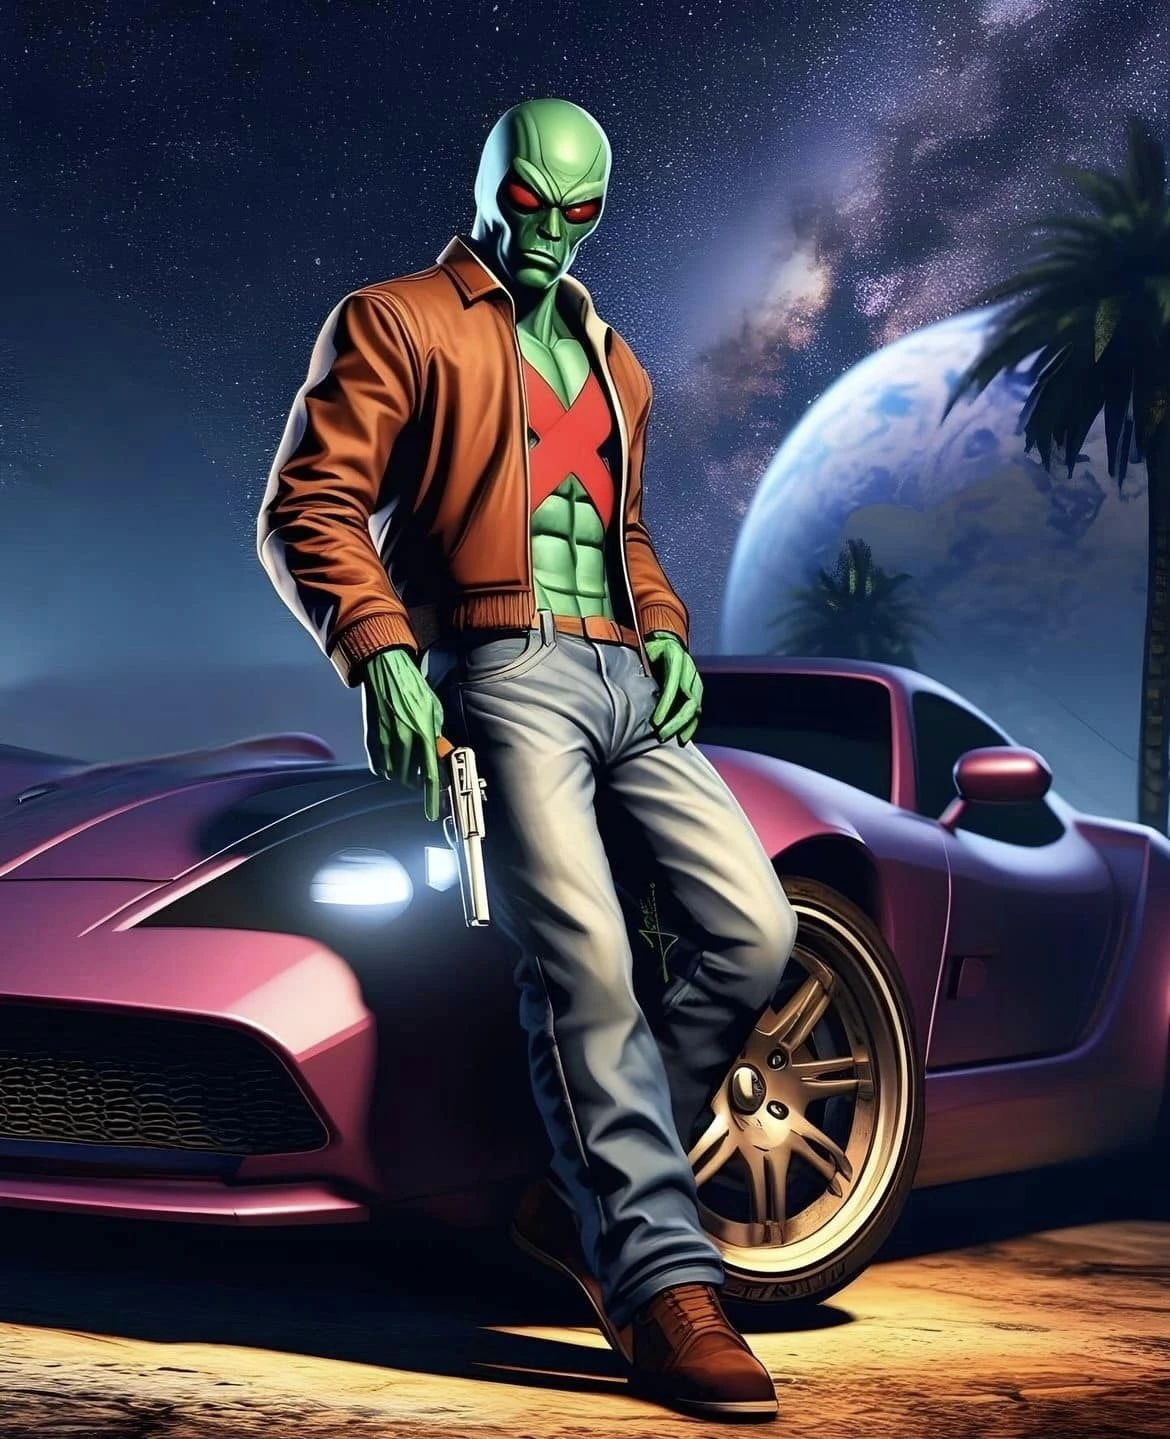 Even Martian Manhunter Joins The Fun With A New Car